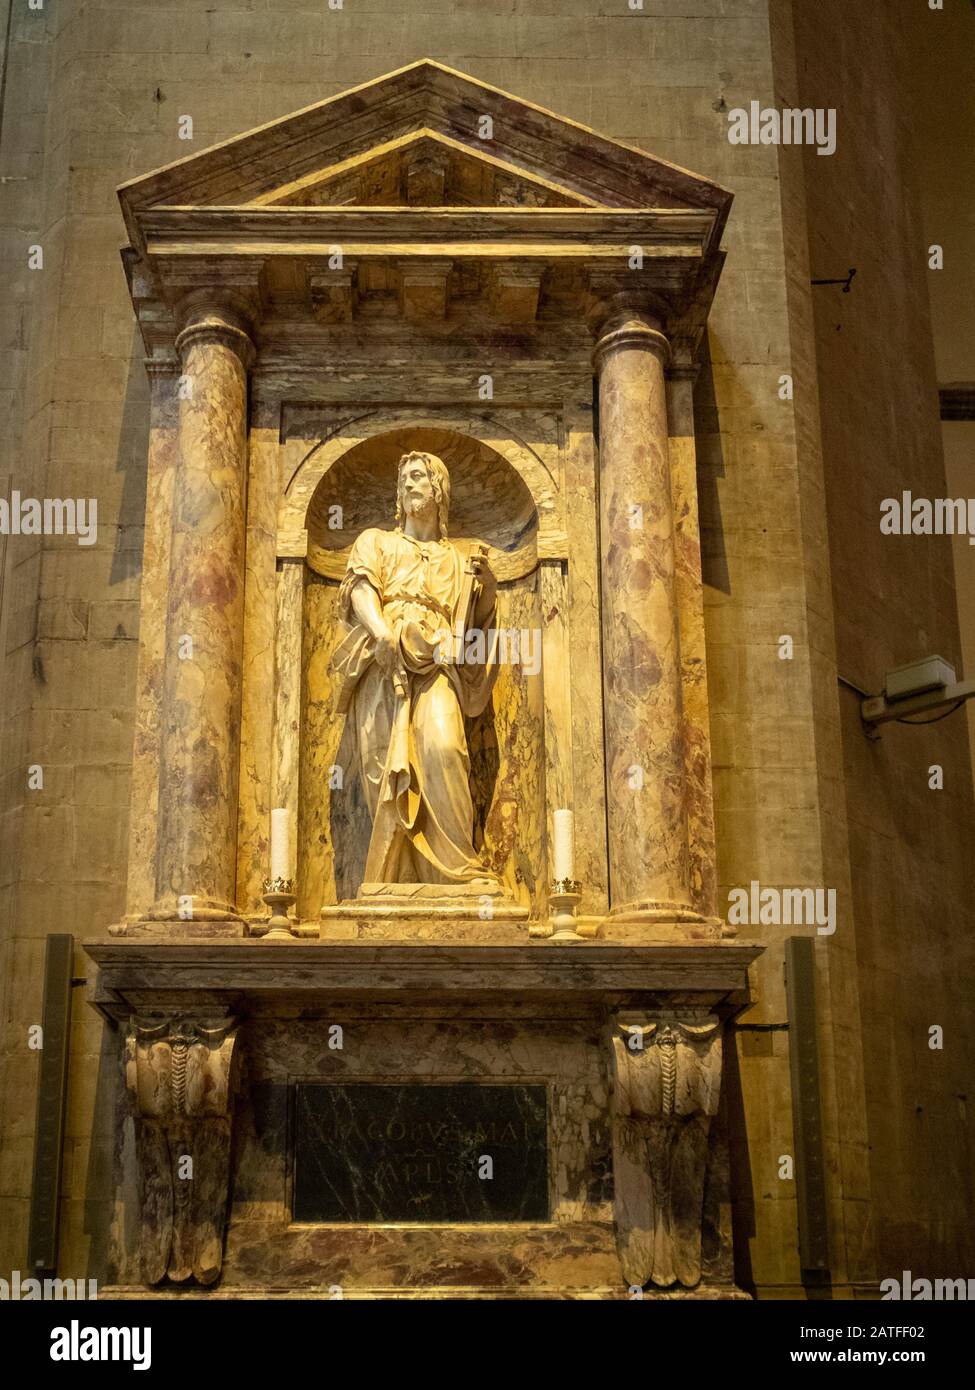 St. James statue inside Florence Duomo Stock Photo